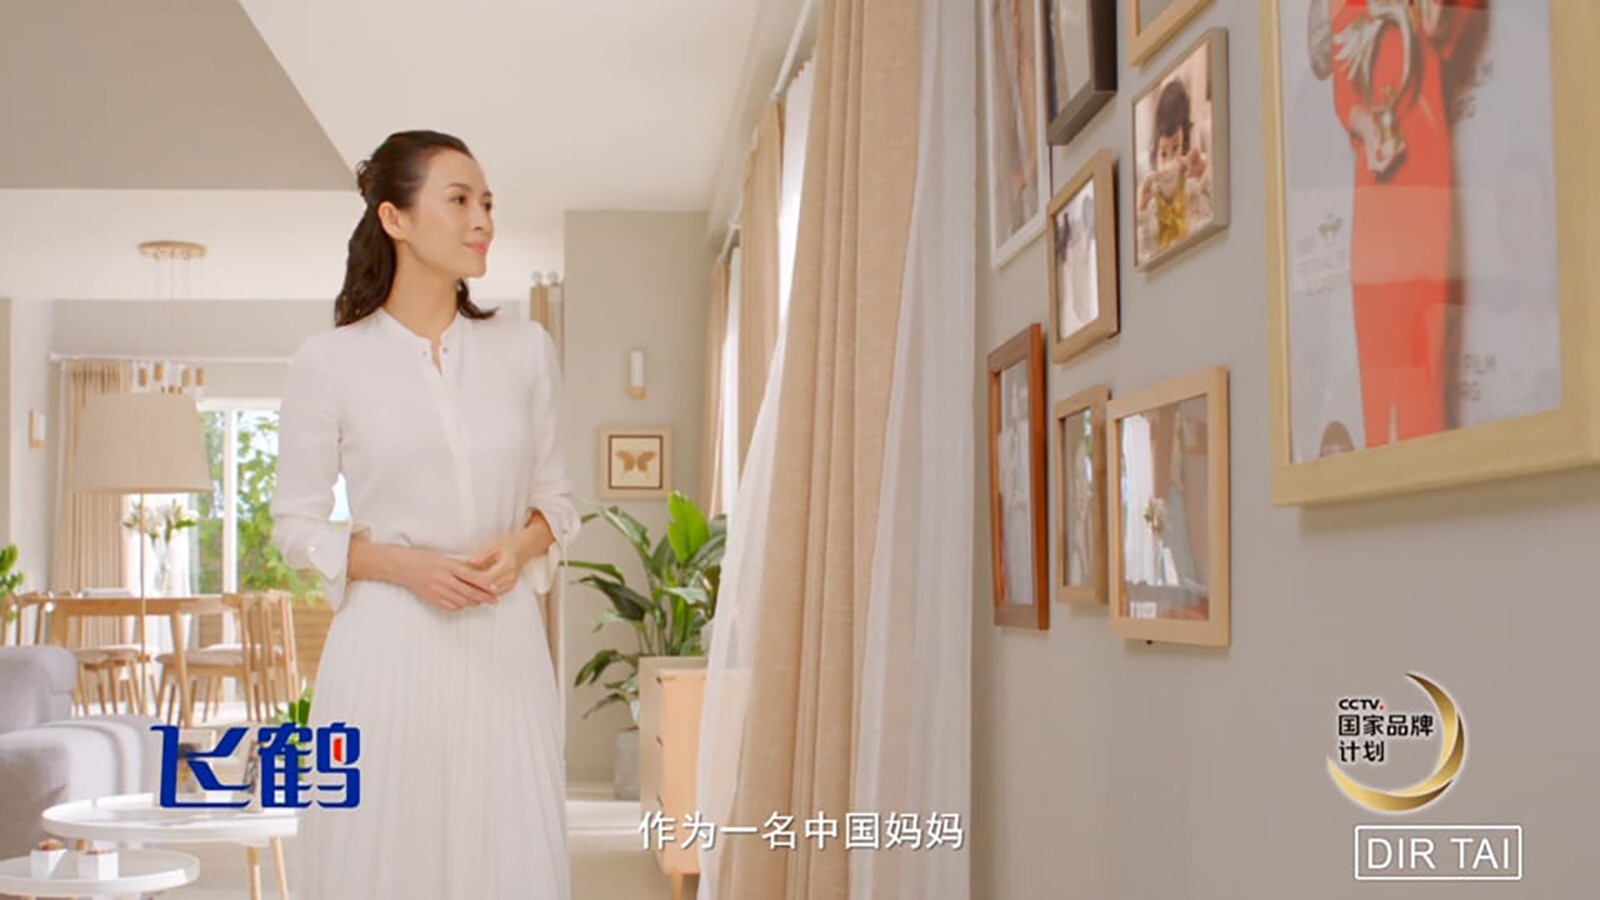 A picture of Zhang Ziyi in an advertisement for China Feihe. Photo:zz-infos.com